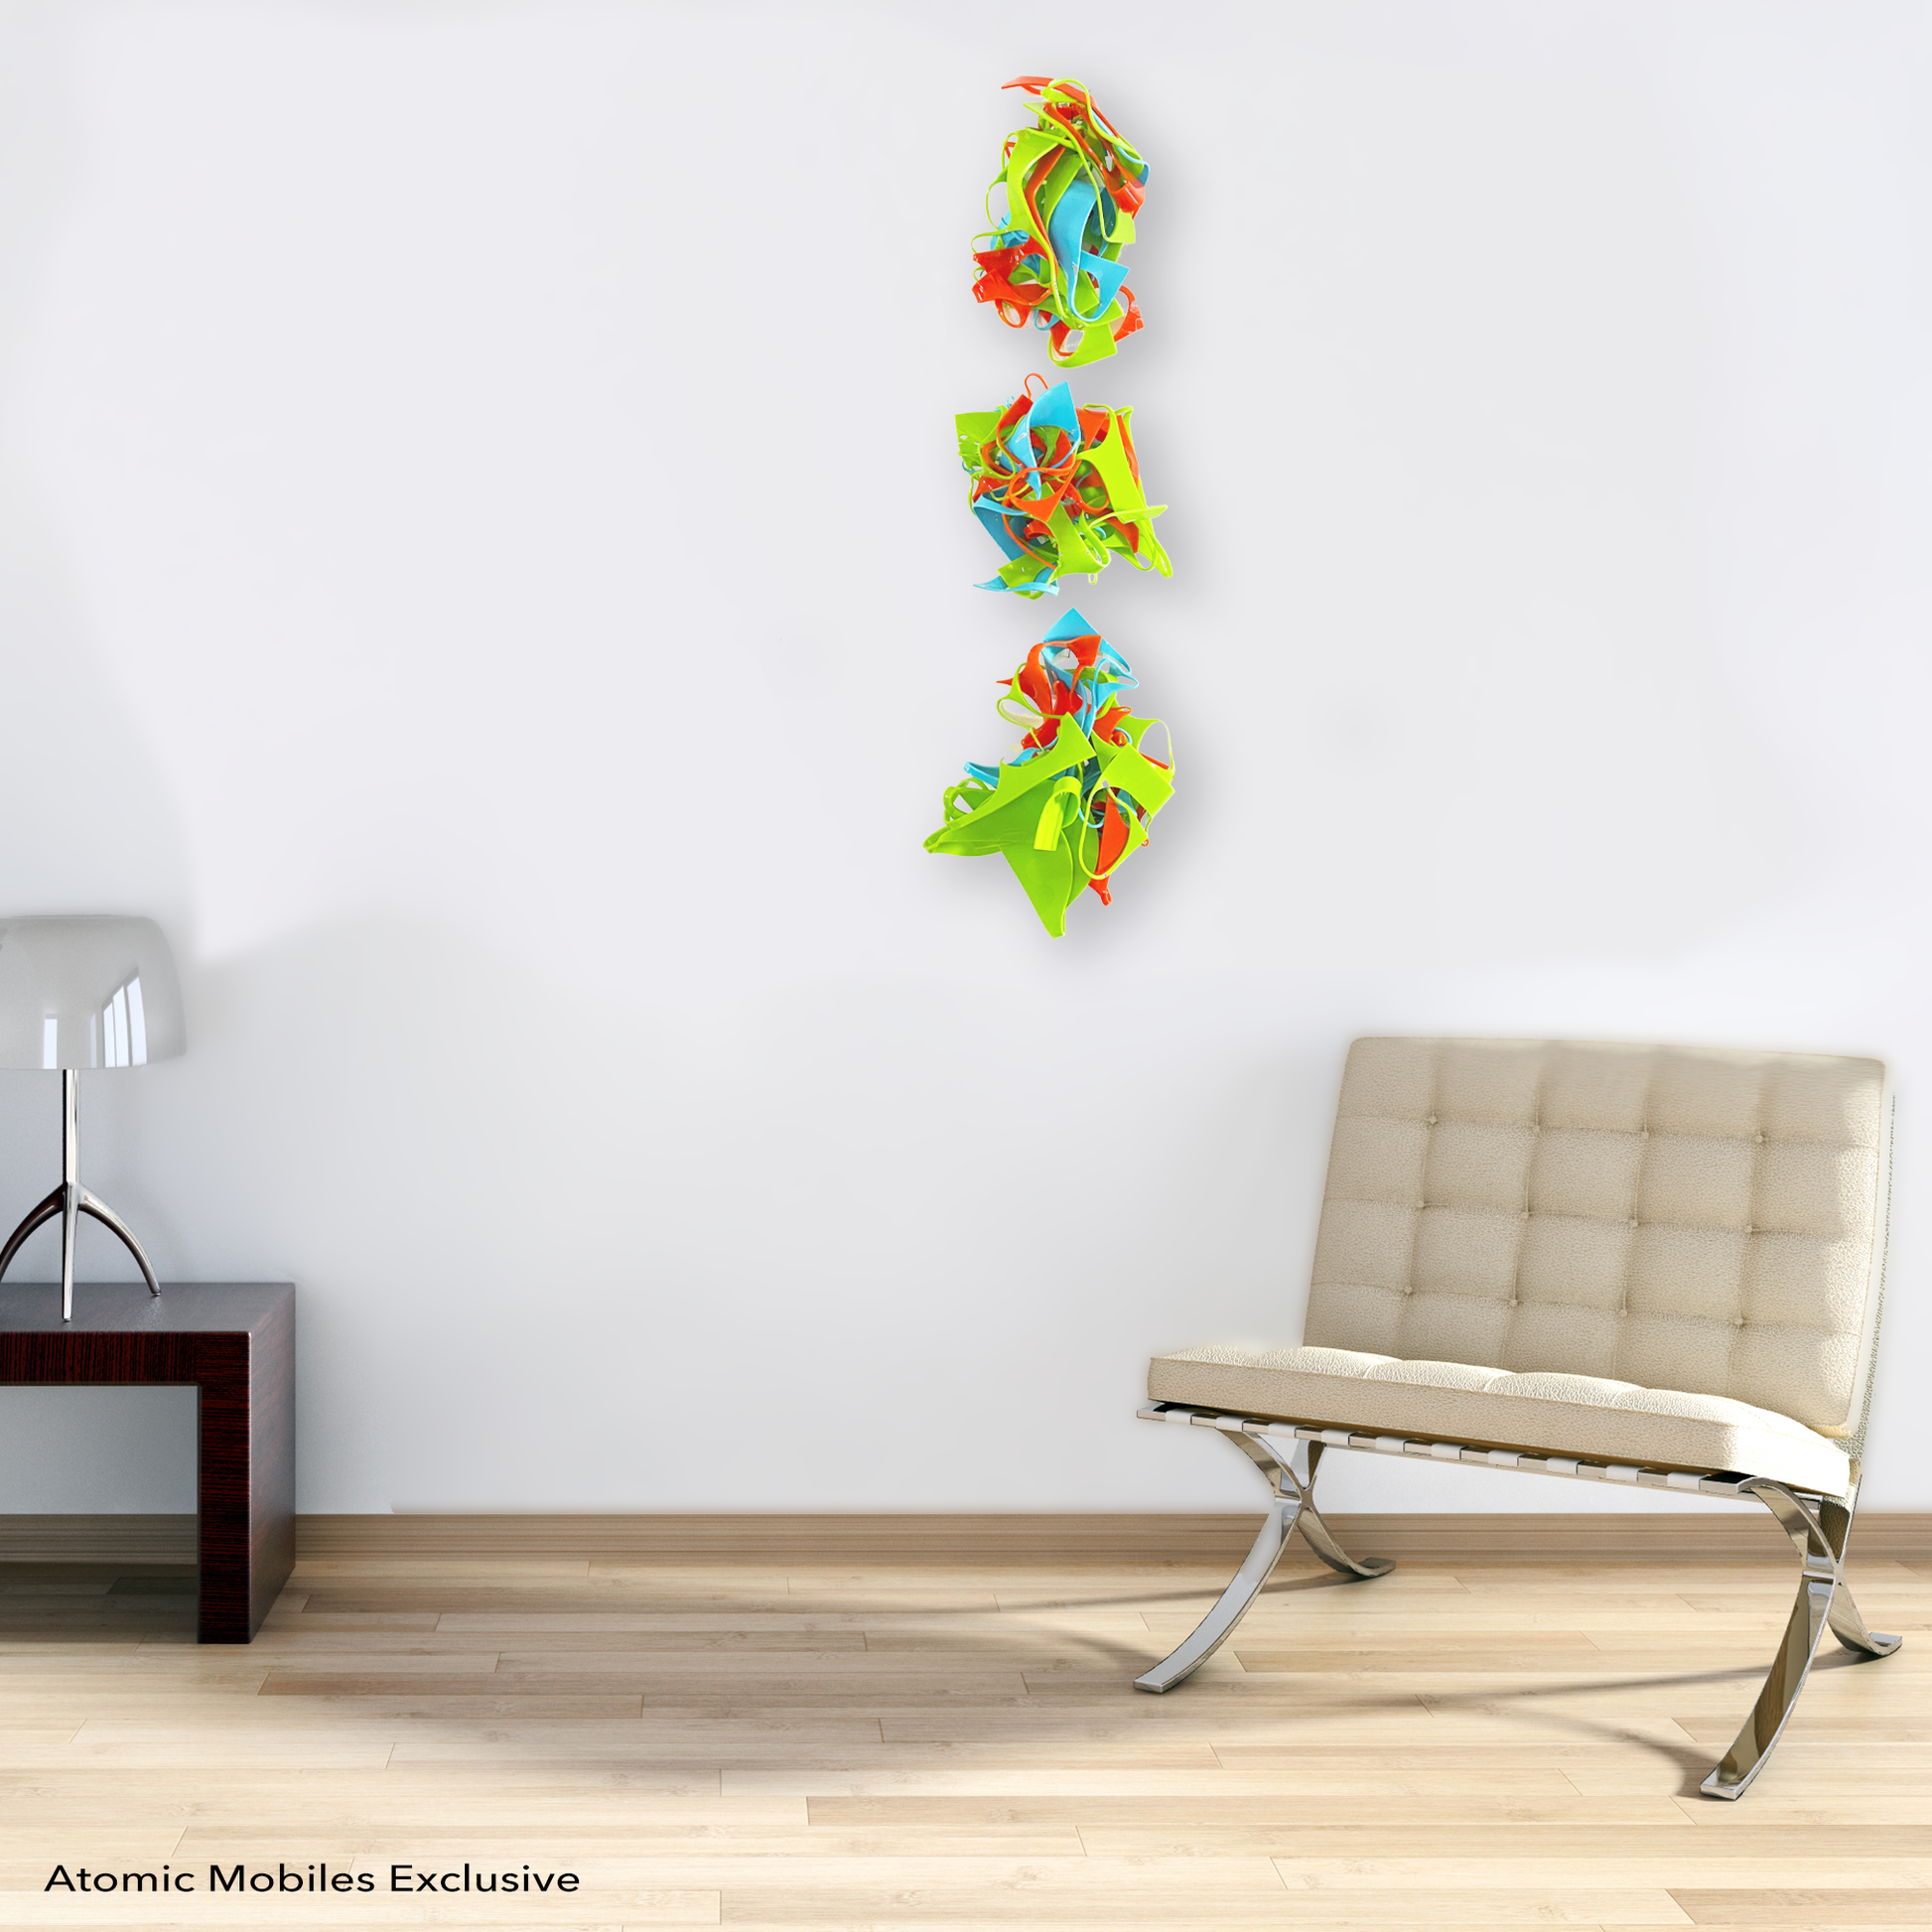 Colorful 3D wall art hanging next to modern beige barcelona chair in a vertical row in Lime Green, Aqua Blue, and Orange - recycled acrylic abstract 3D wall art by AtomicMobiles.com